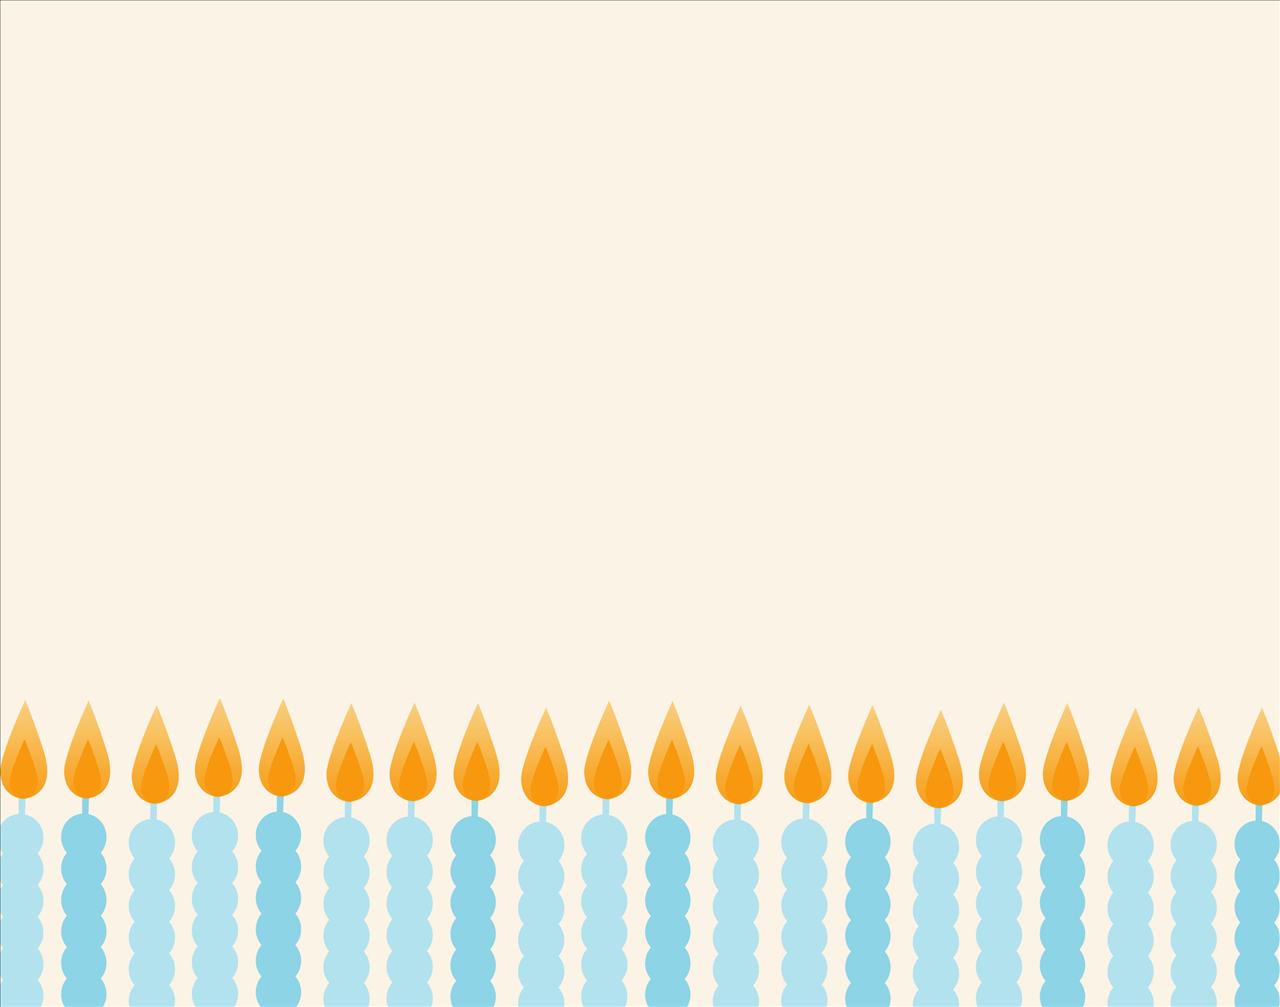 Blue Candles on off White PPT Backgrounds